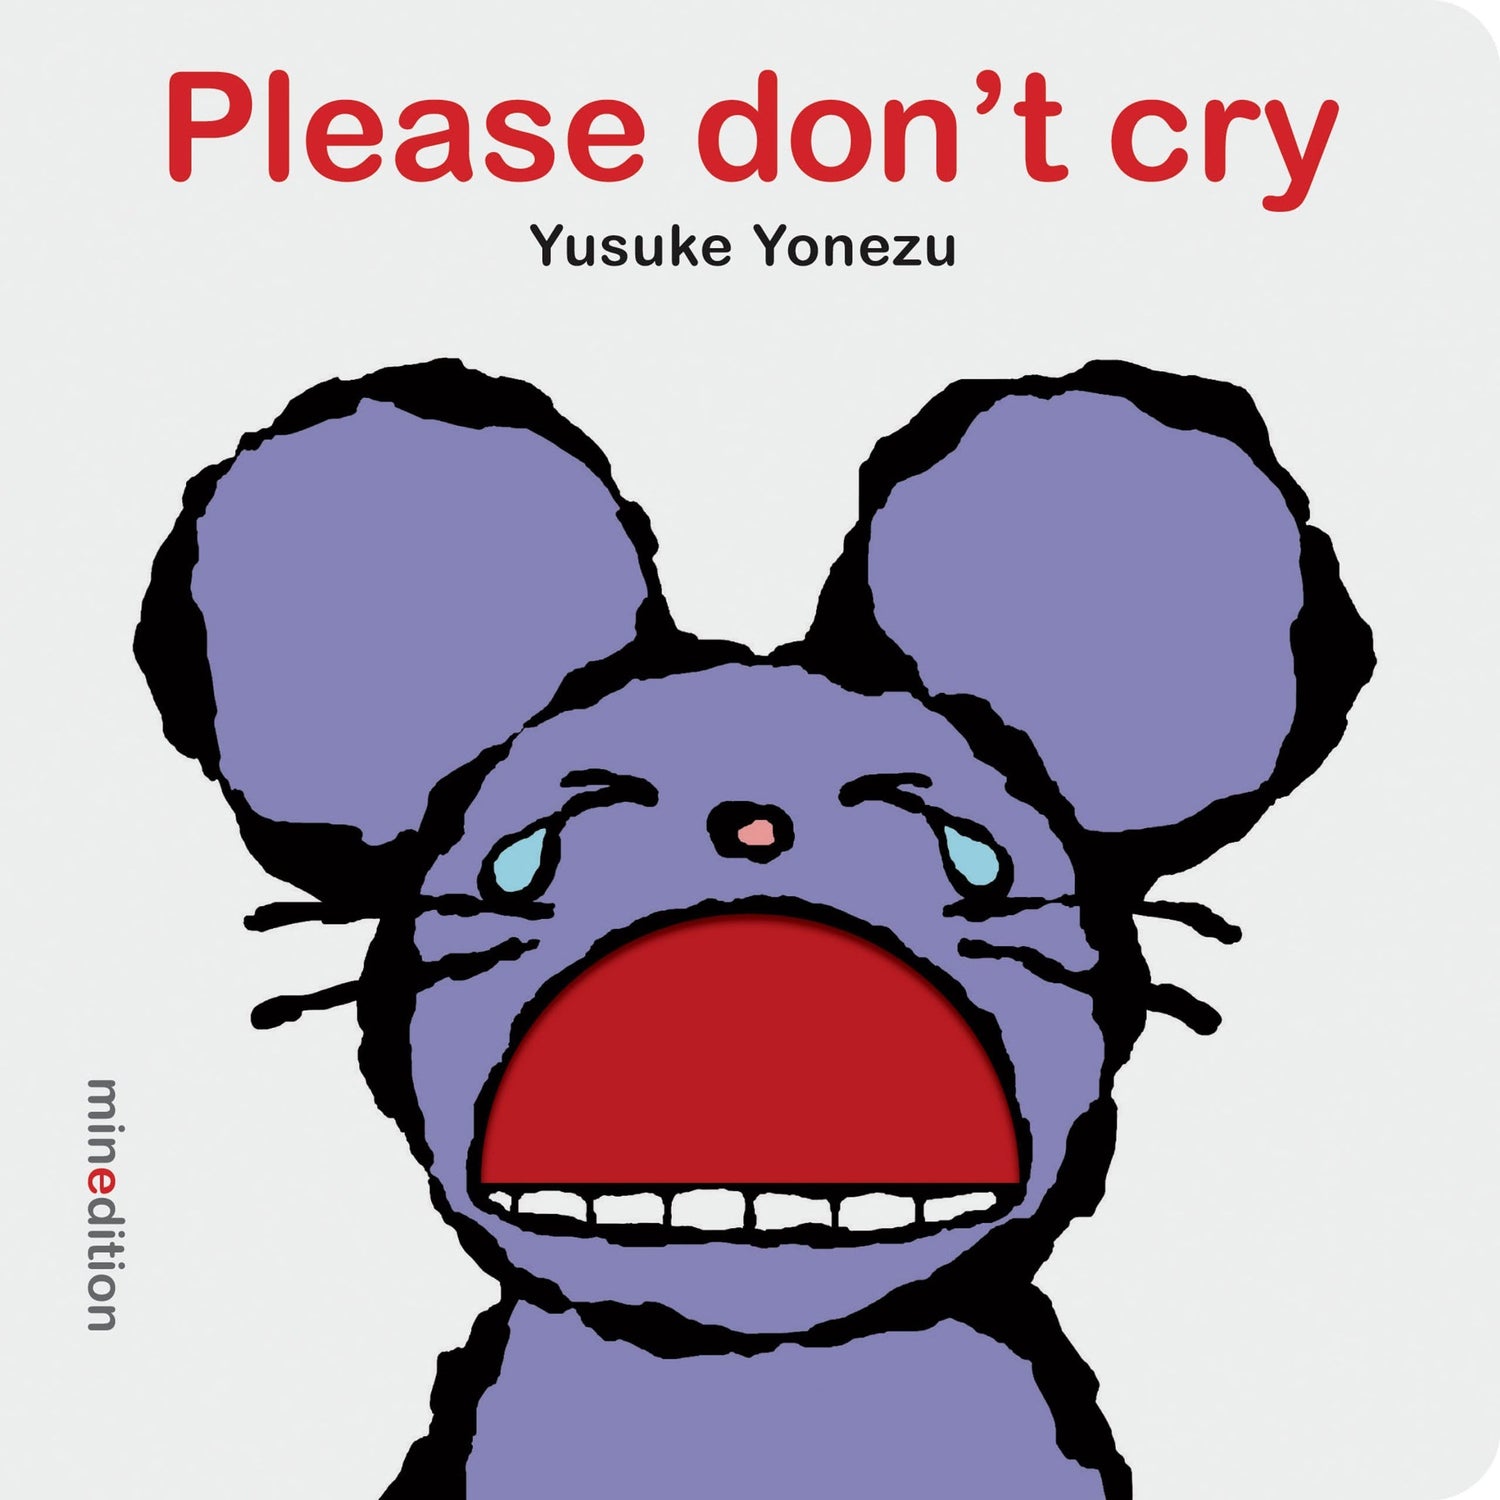 Please Don't Cry